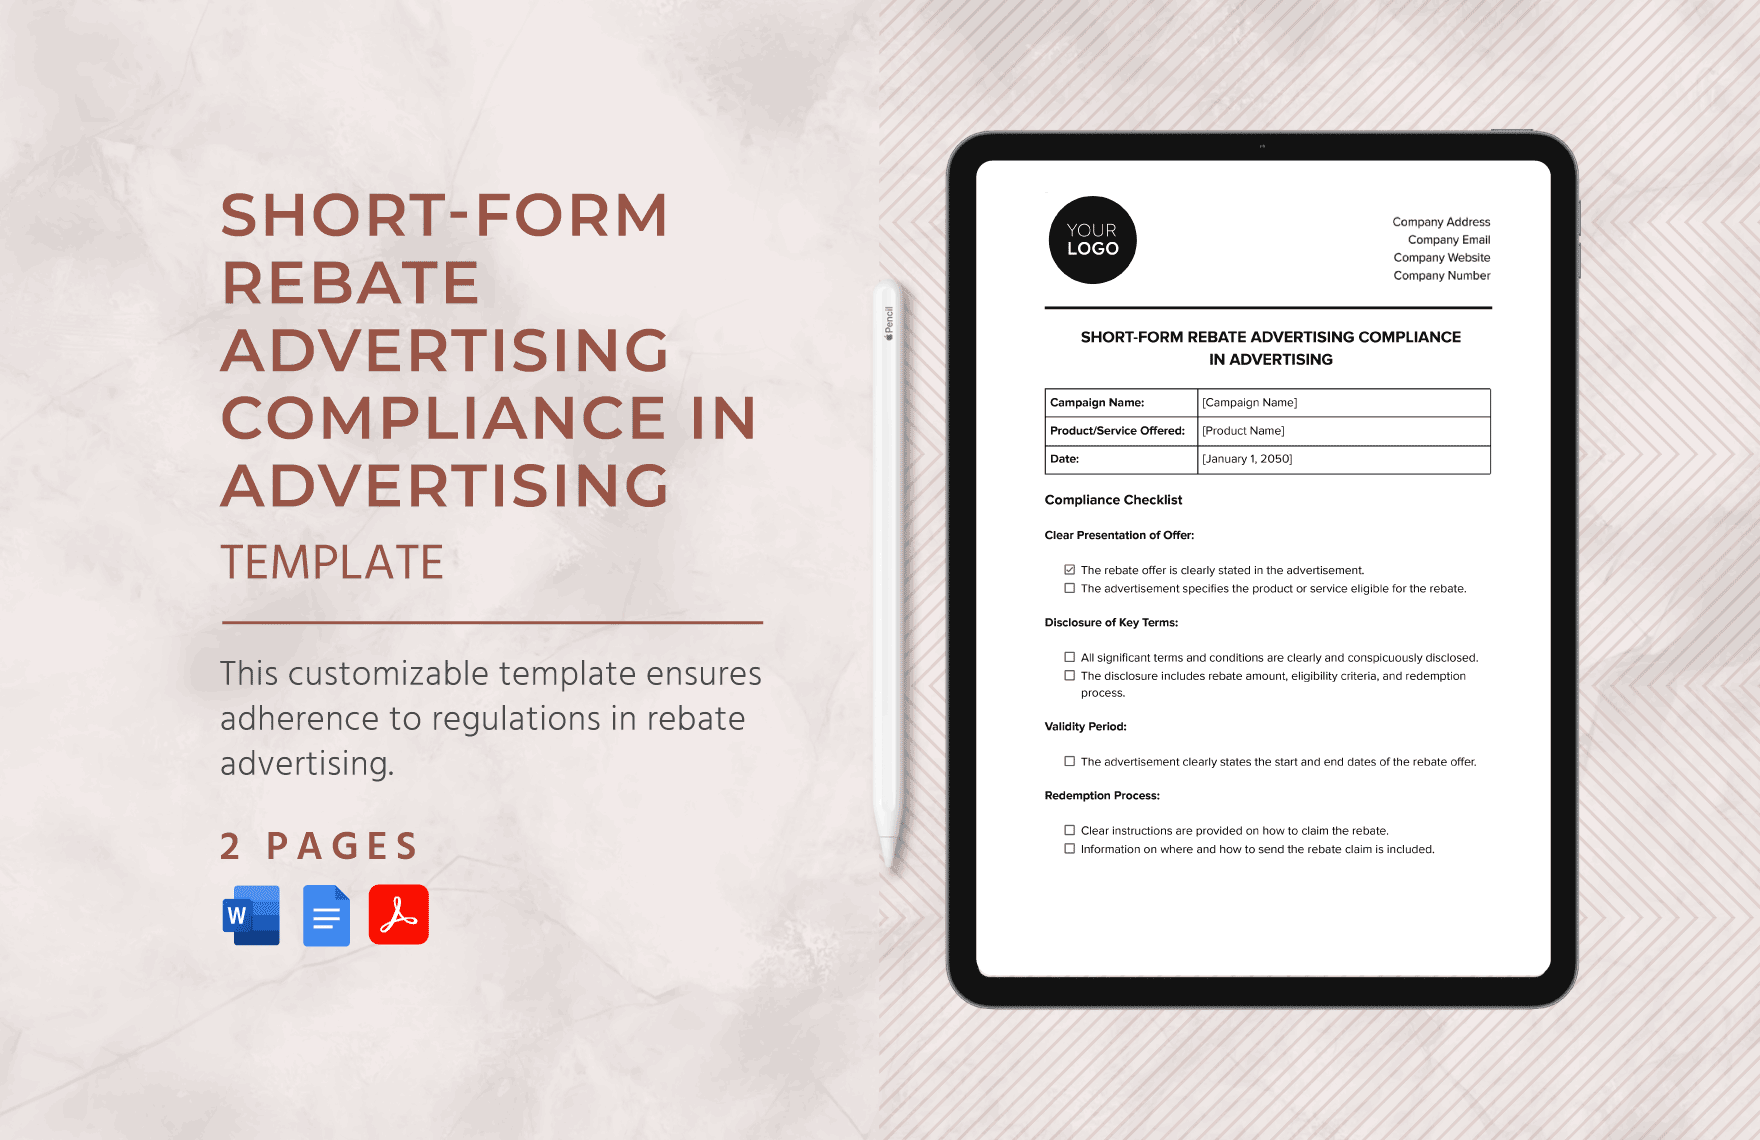 Short-Form Rebate Advertising Compliance in Advertising Template